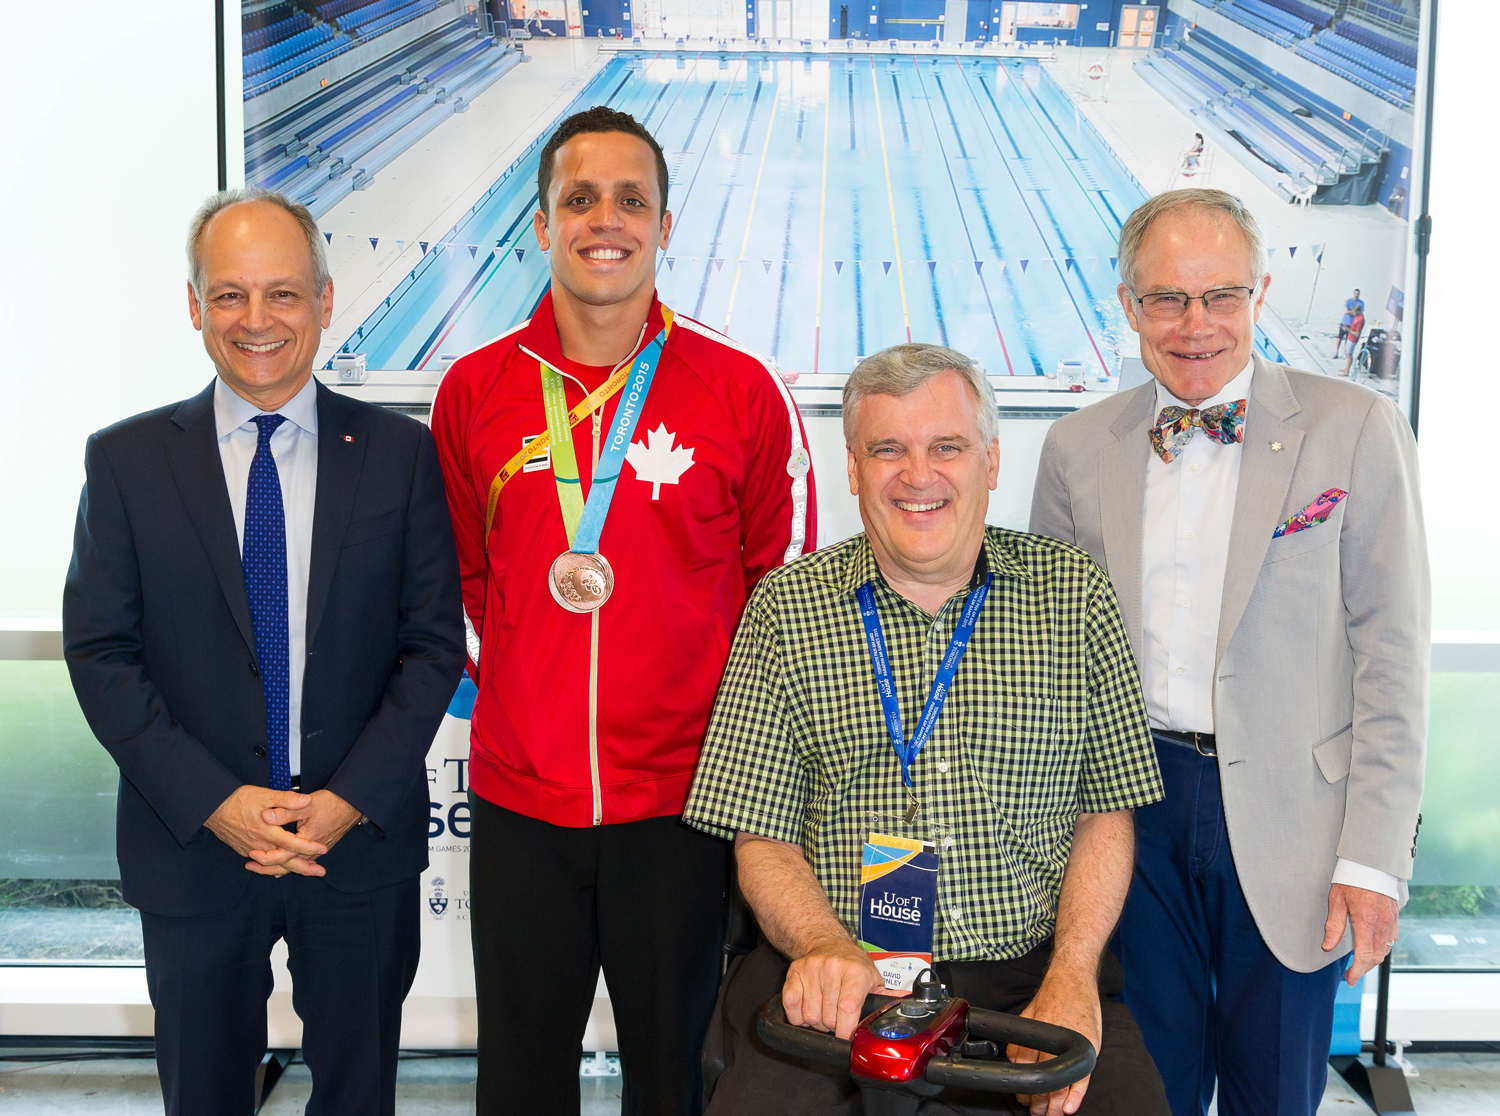 David Onley at Pan Am swimming competition